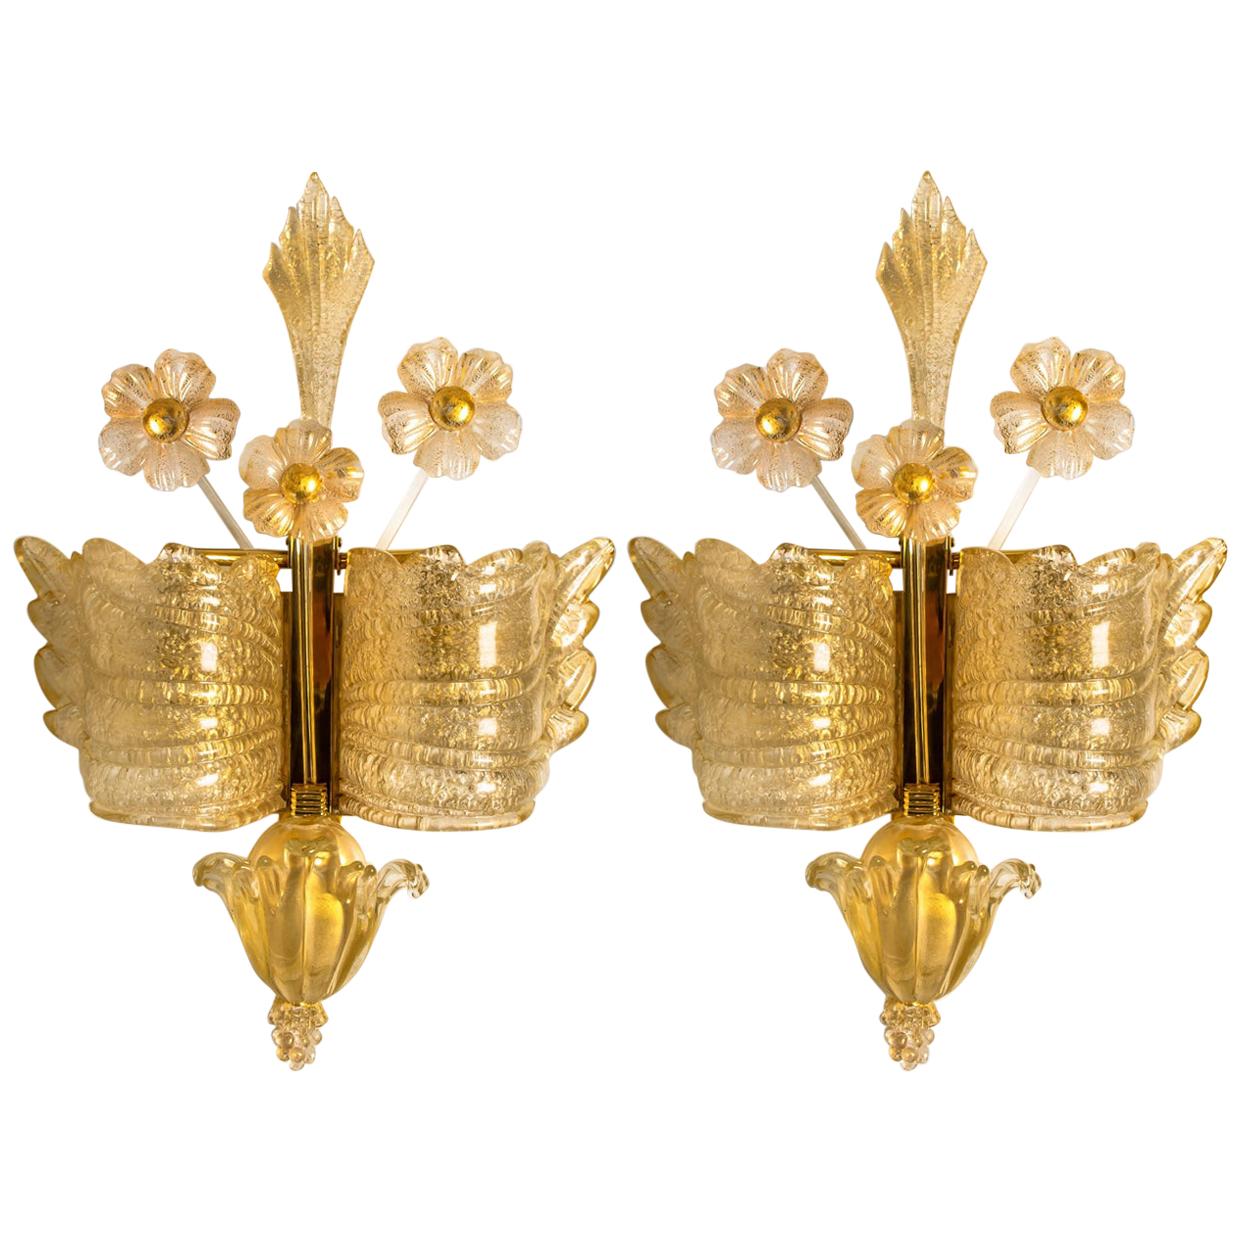 Pair of Stunning Huge Extra Large Wall Lights by Barovier & Toso, Italy For Sale 1